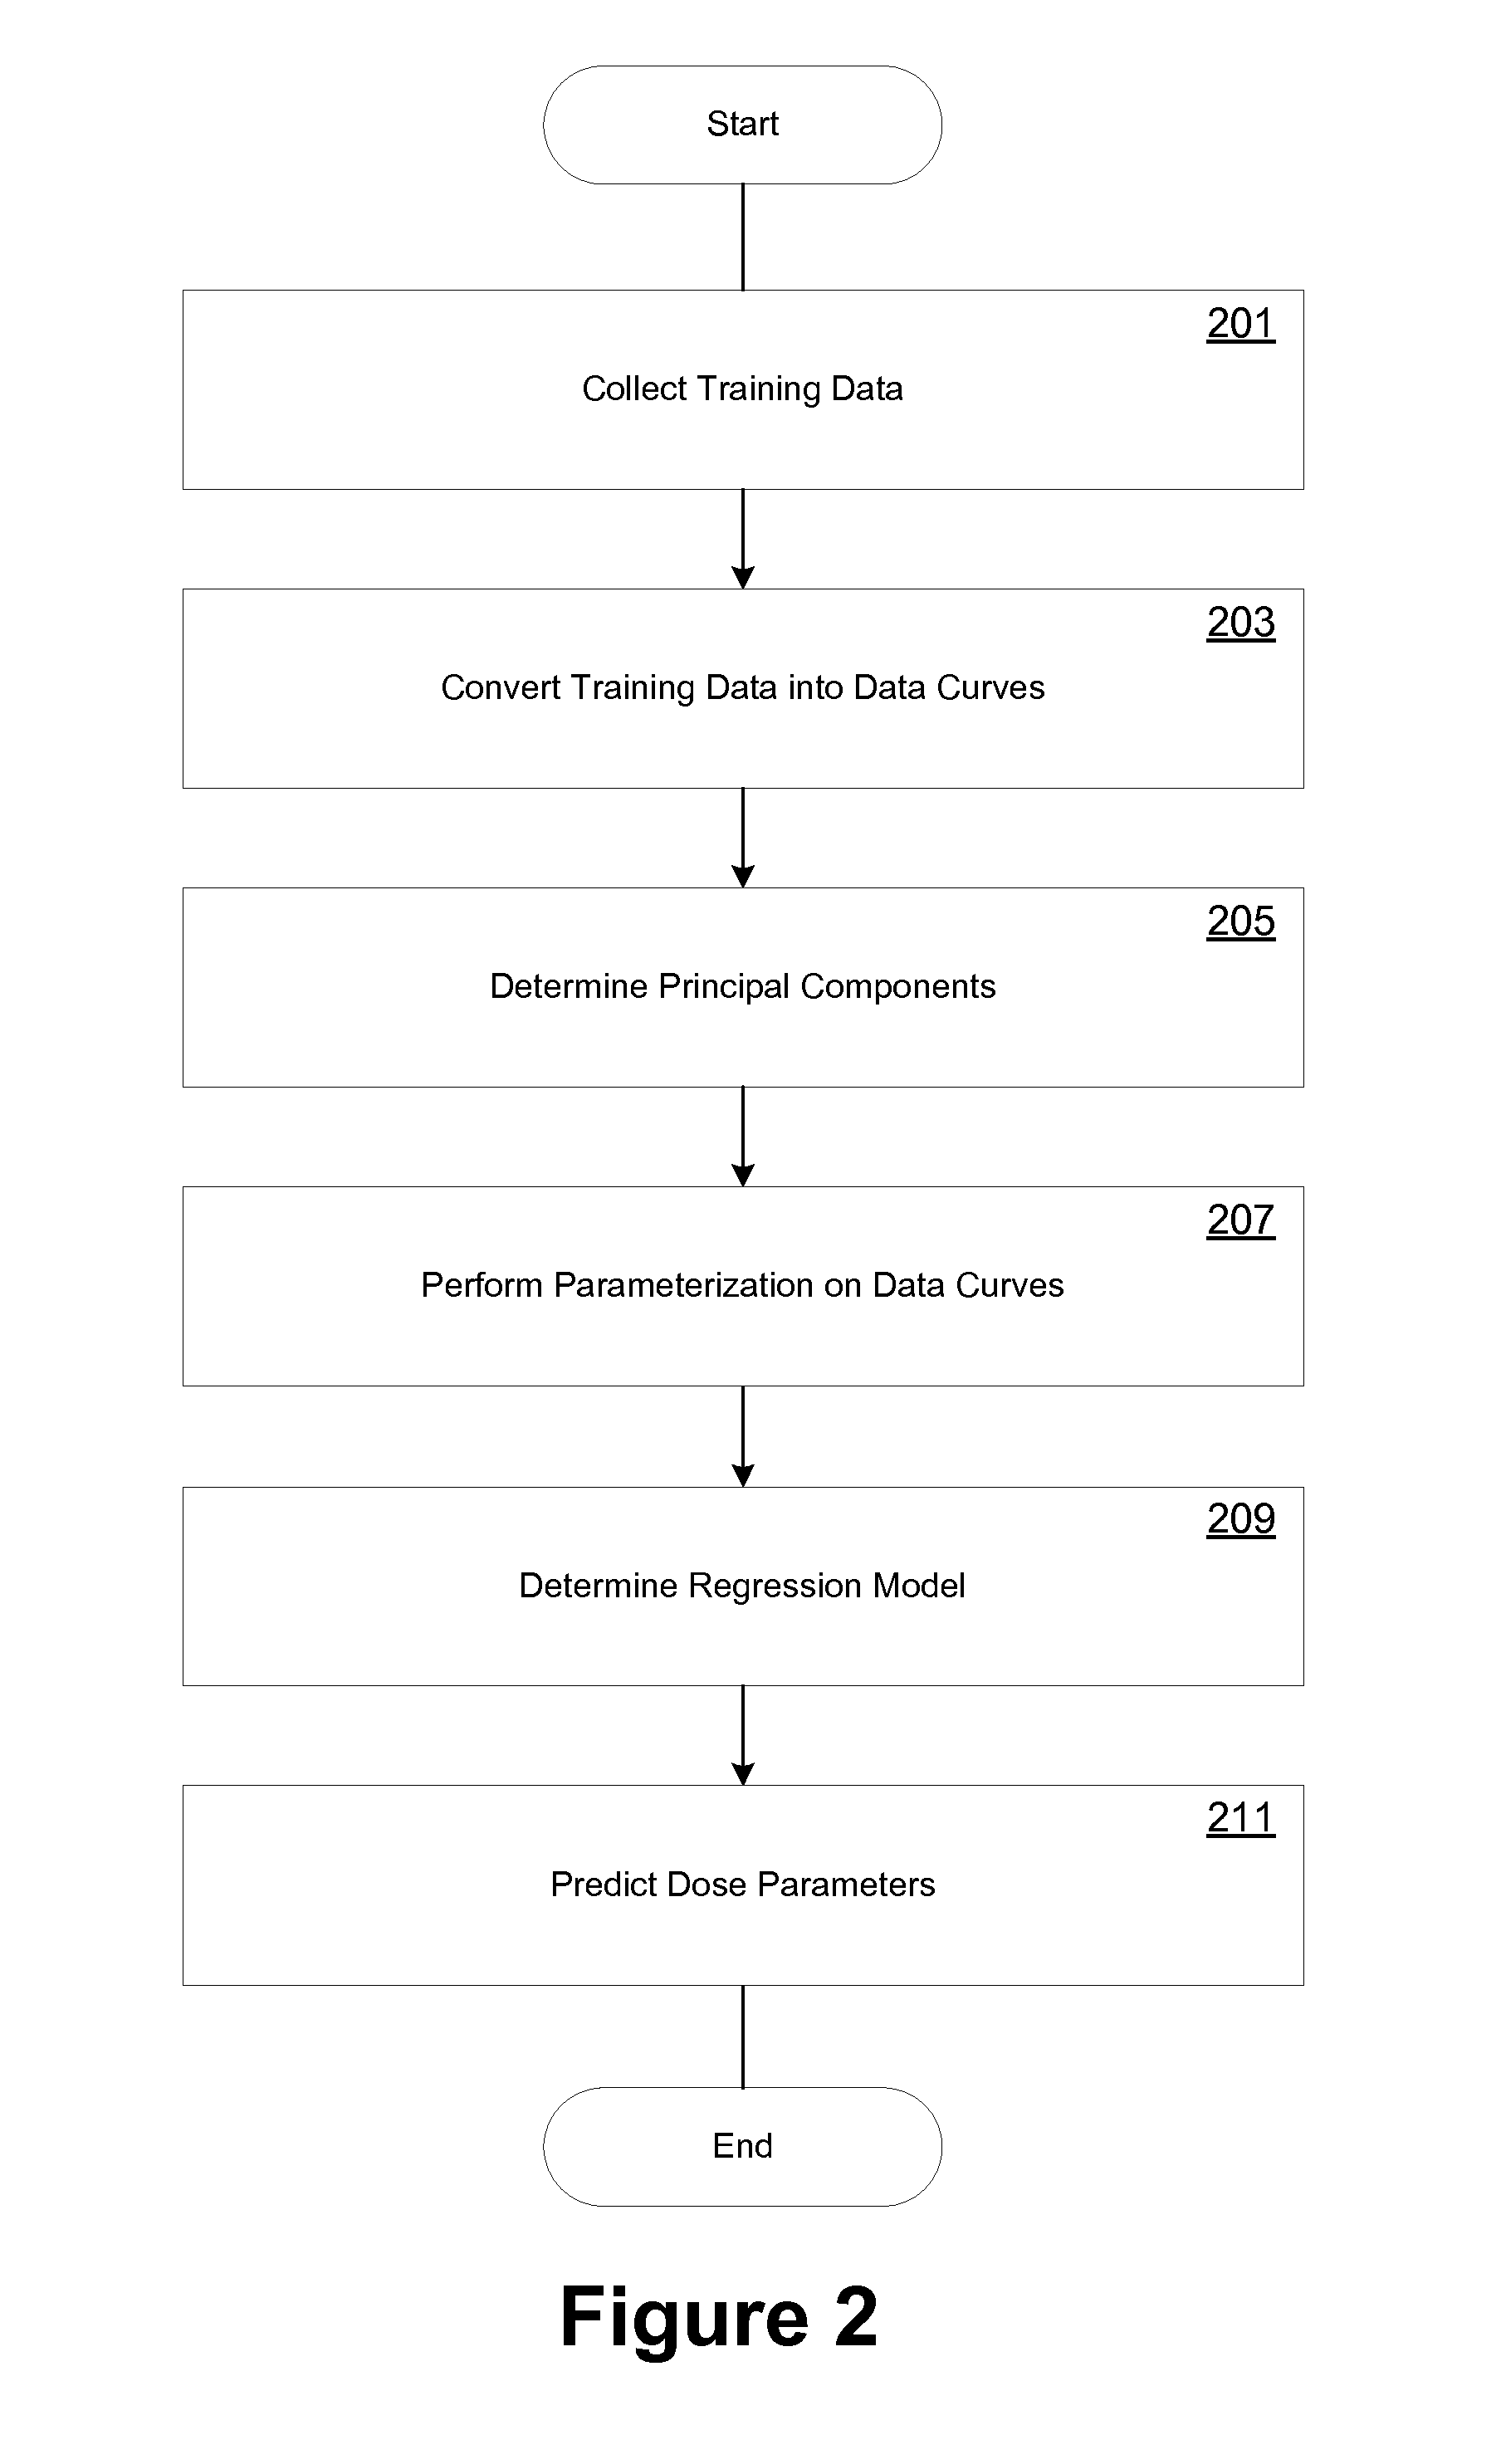 Systems and methods for automatic creation of dose prediction models and therapy treatment plans as a cloud service